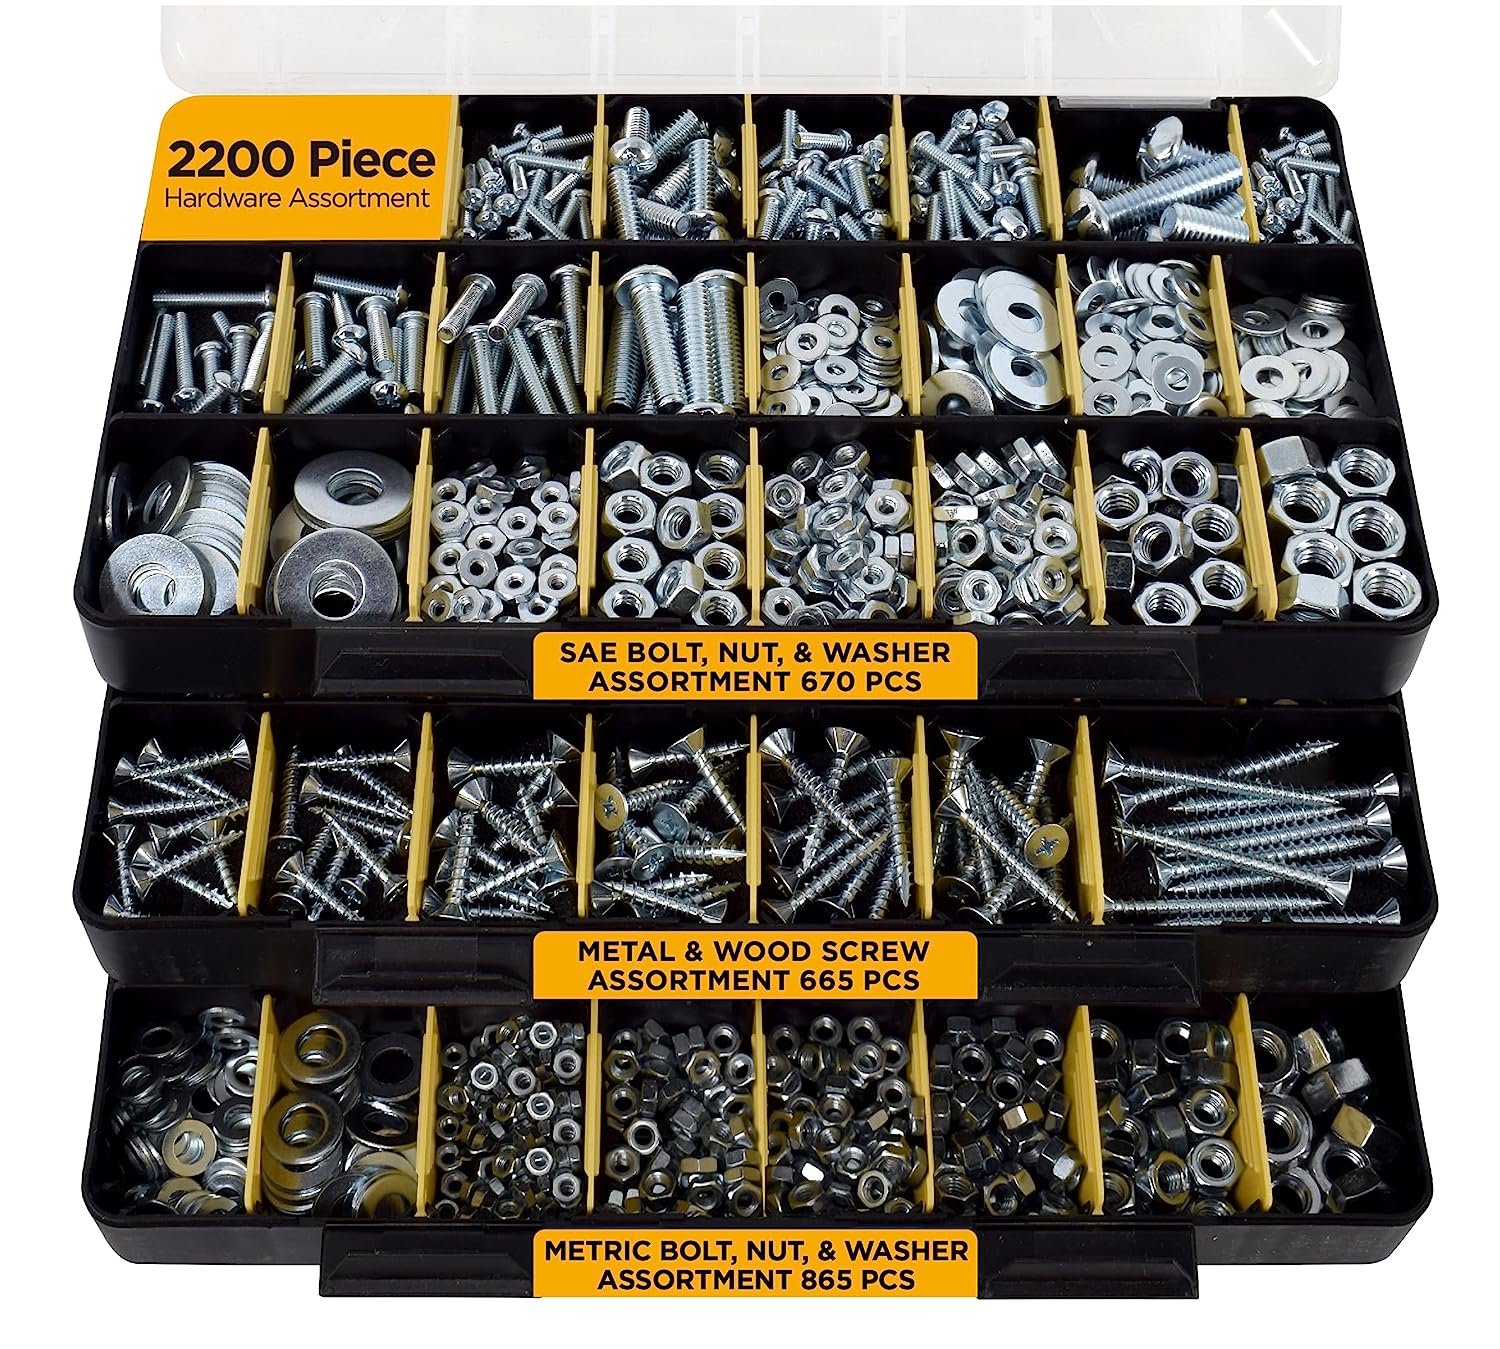 2200 Piece Hardware Assortment Kit With Screws Nuts Bolts And Washers 3 Trays 